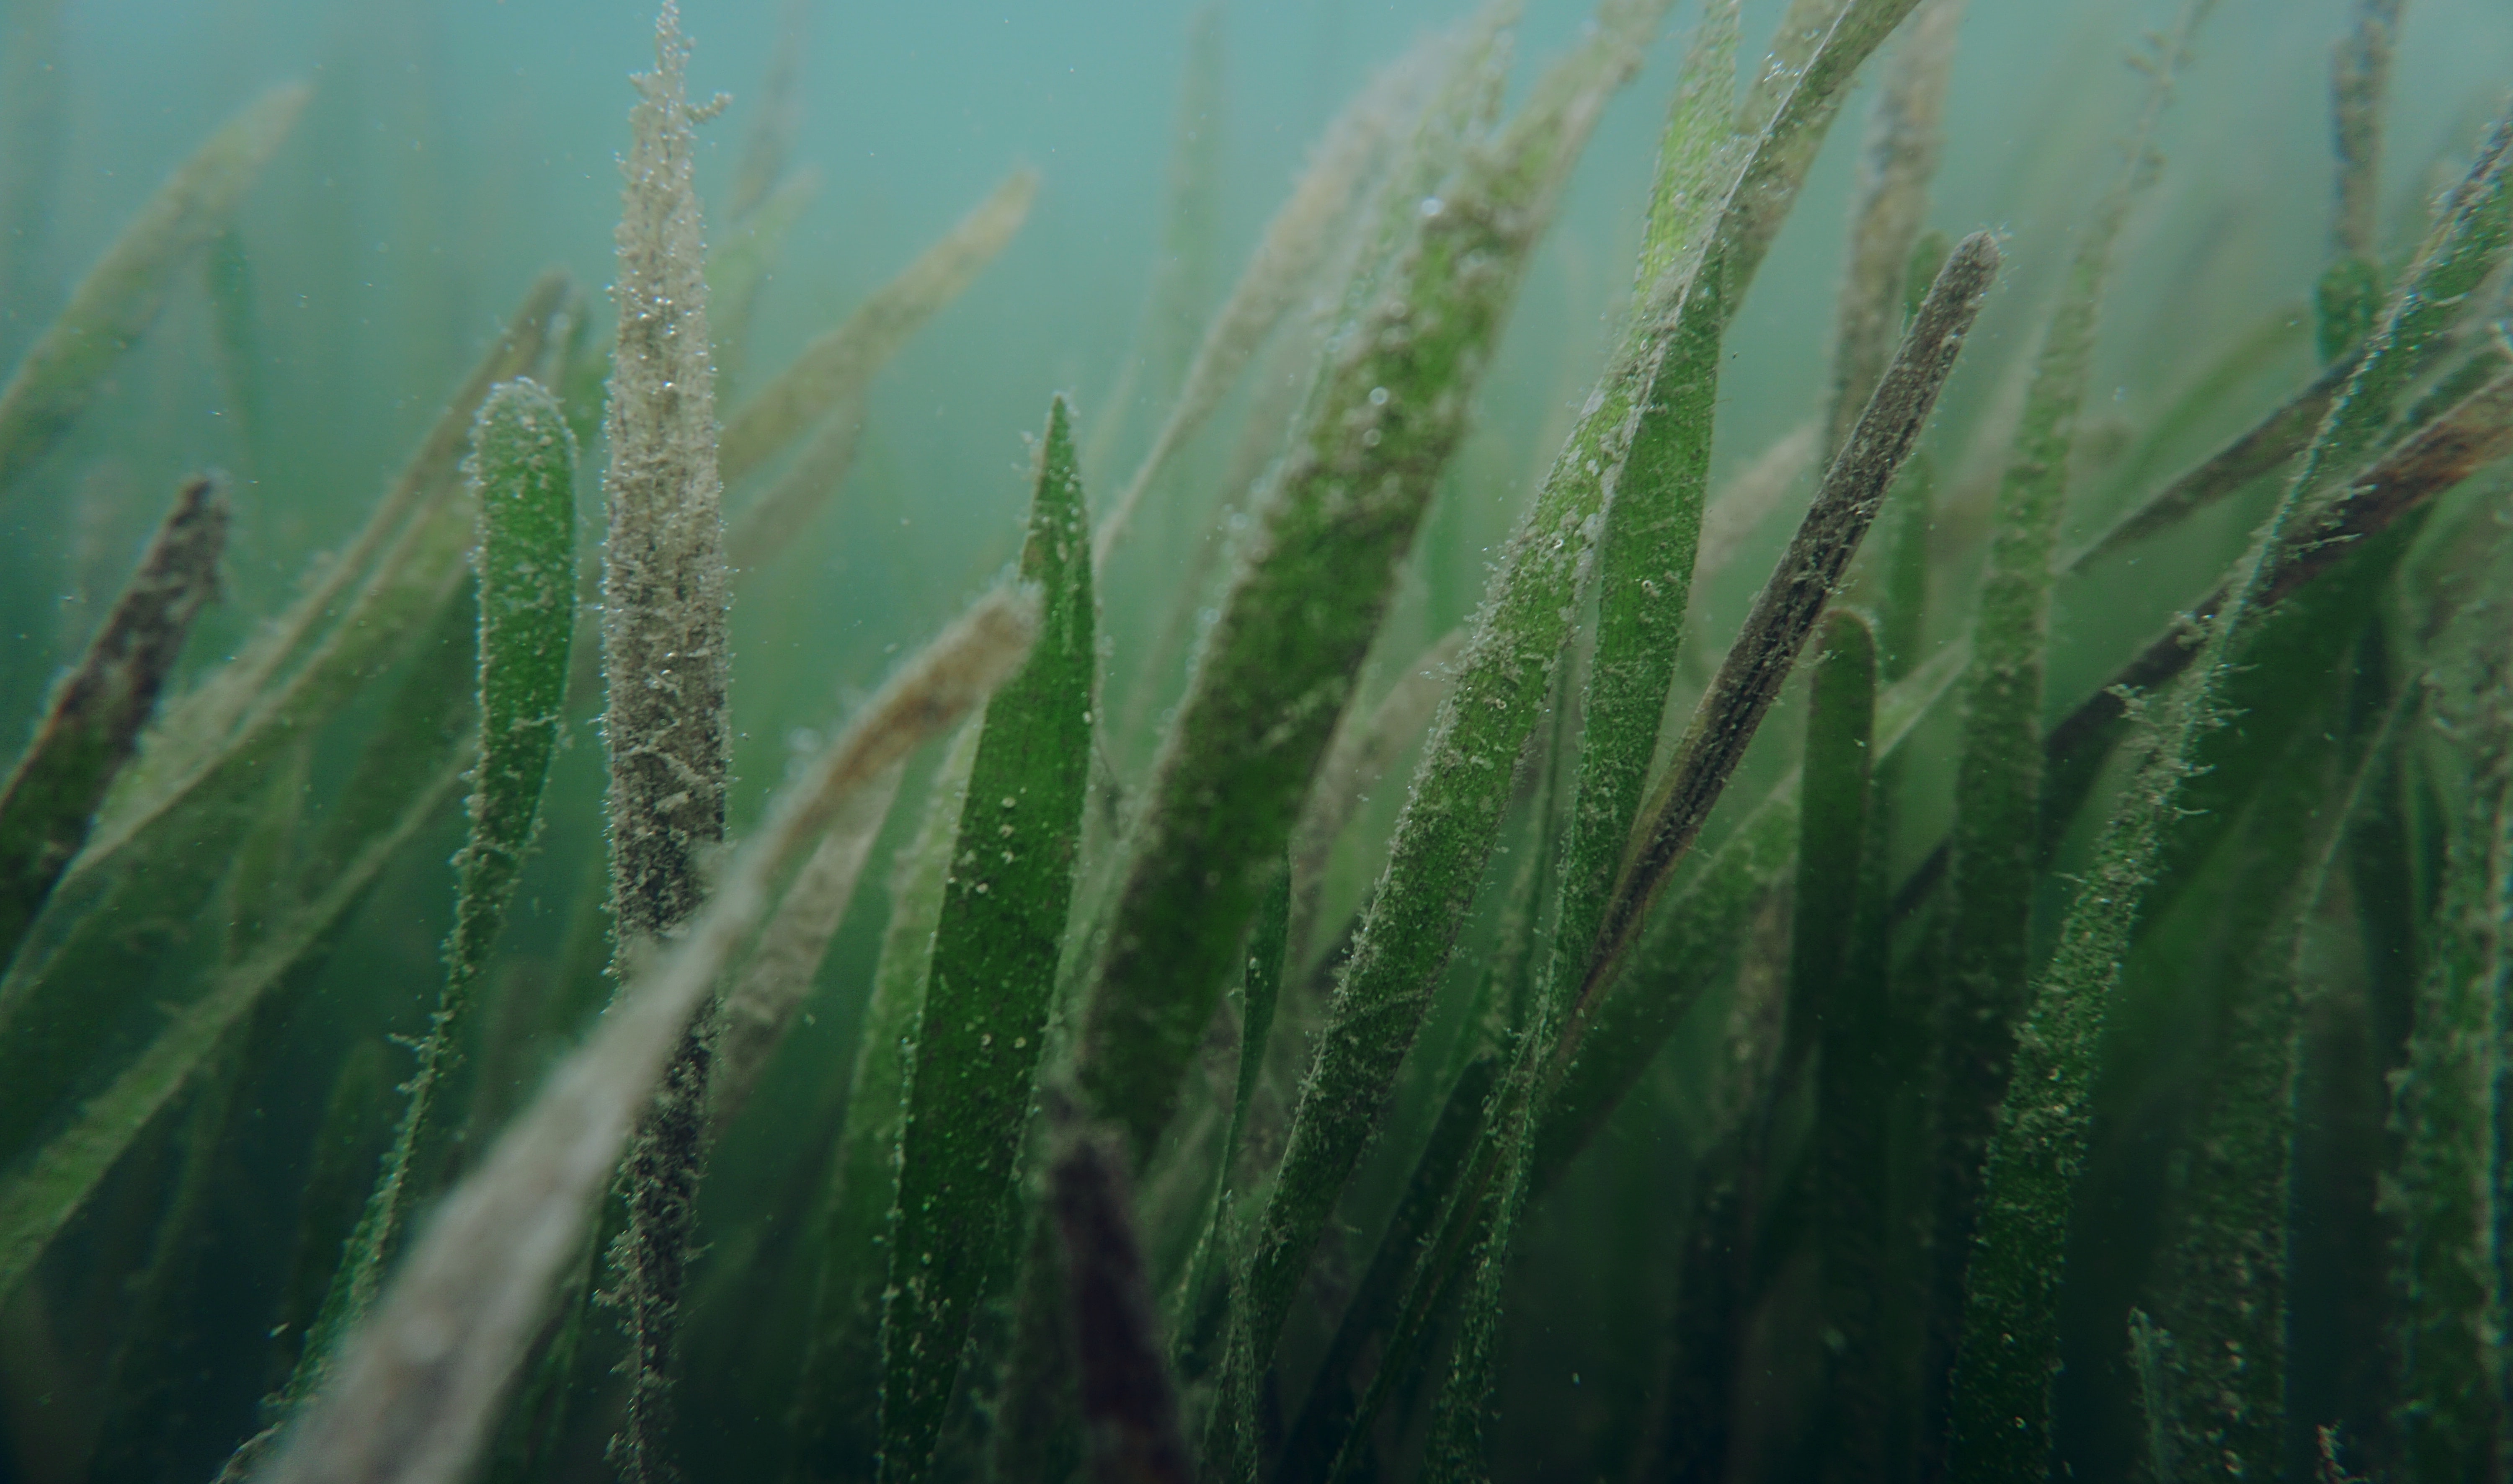 a submerged seagrass bed